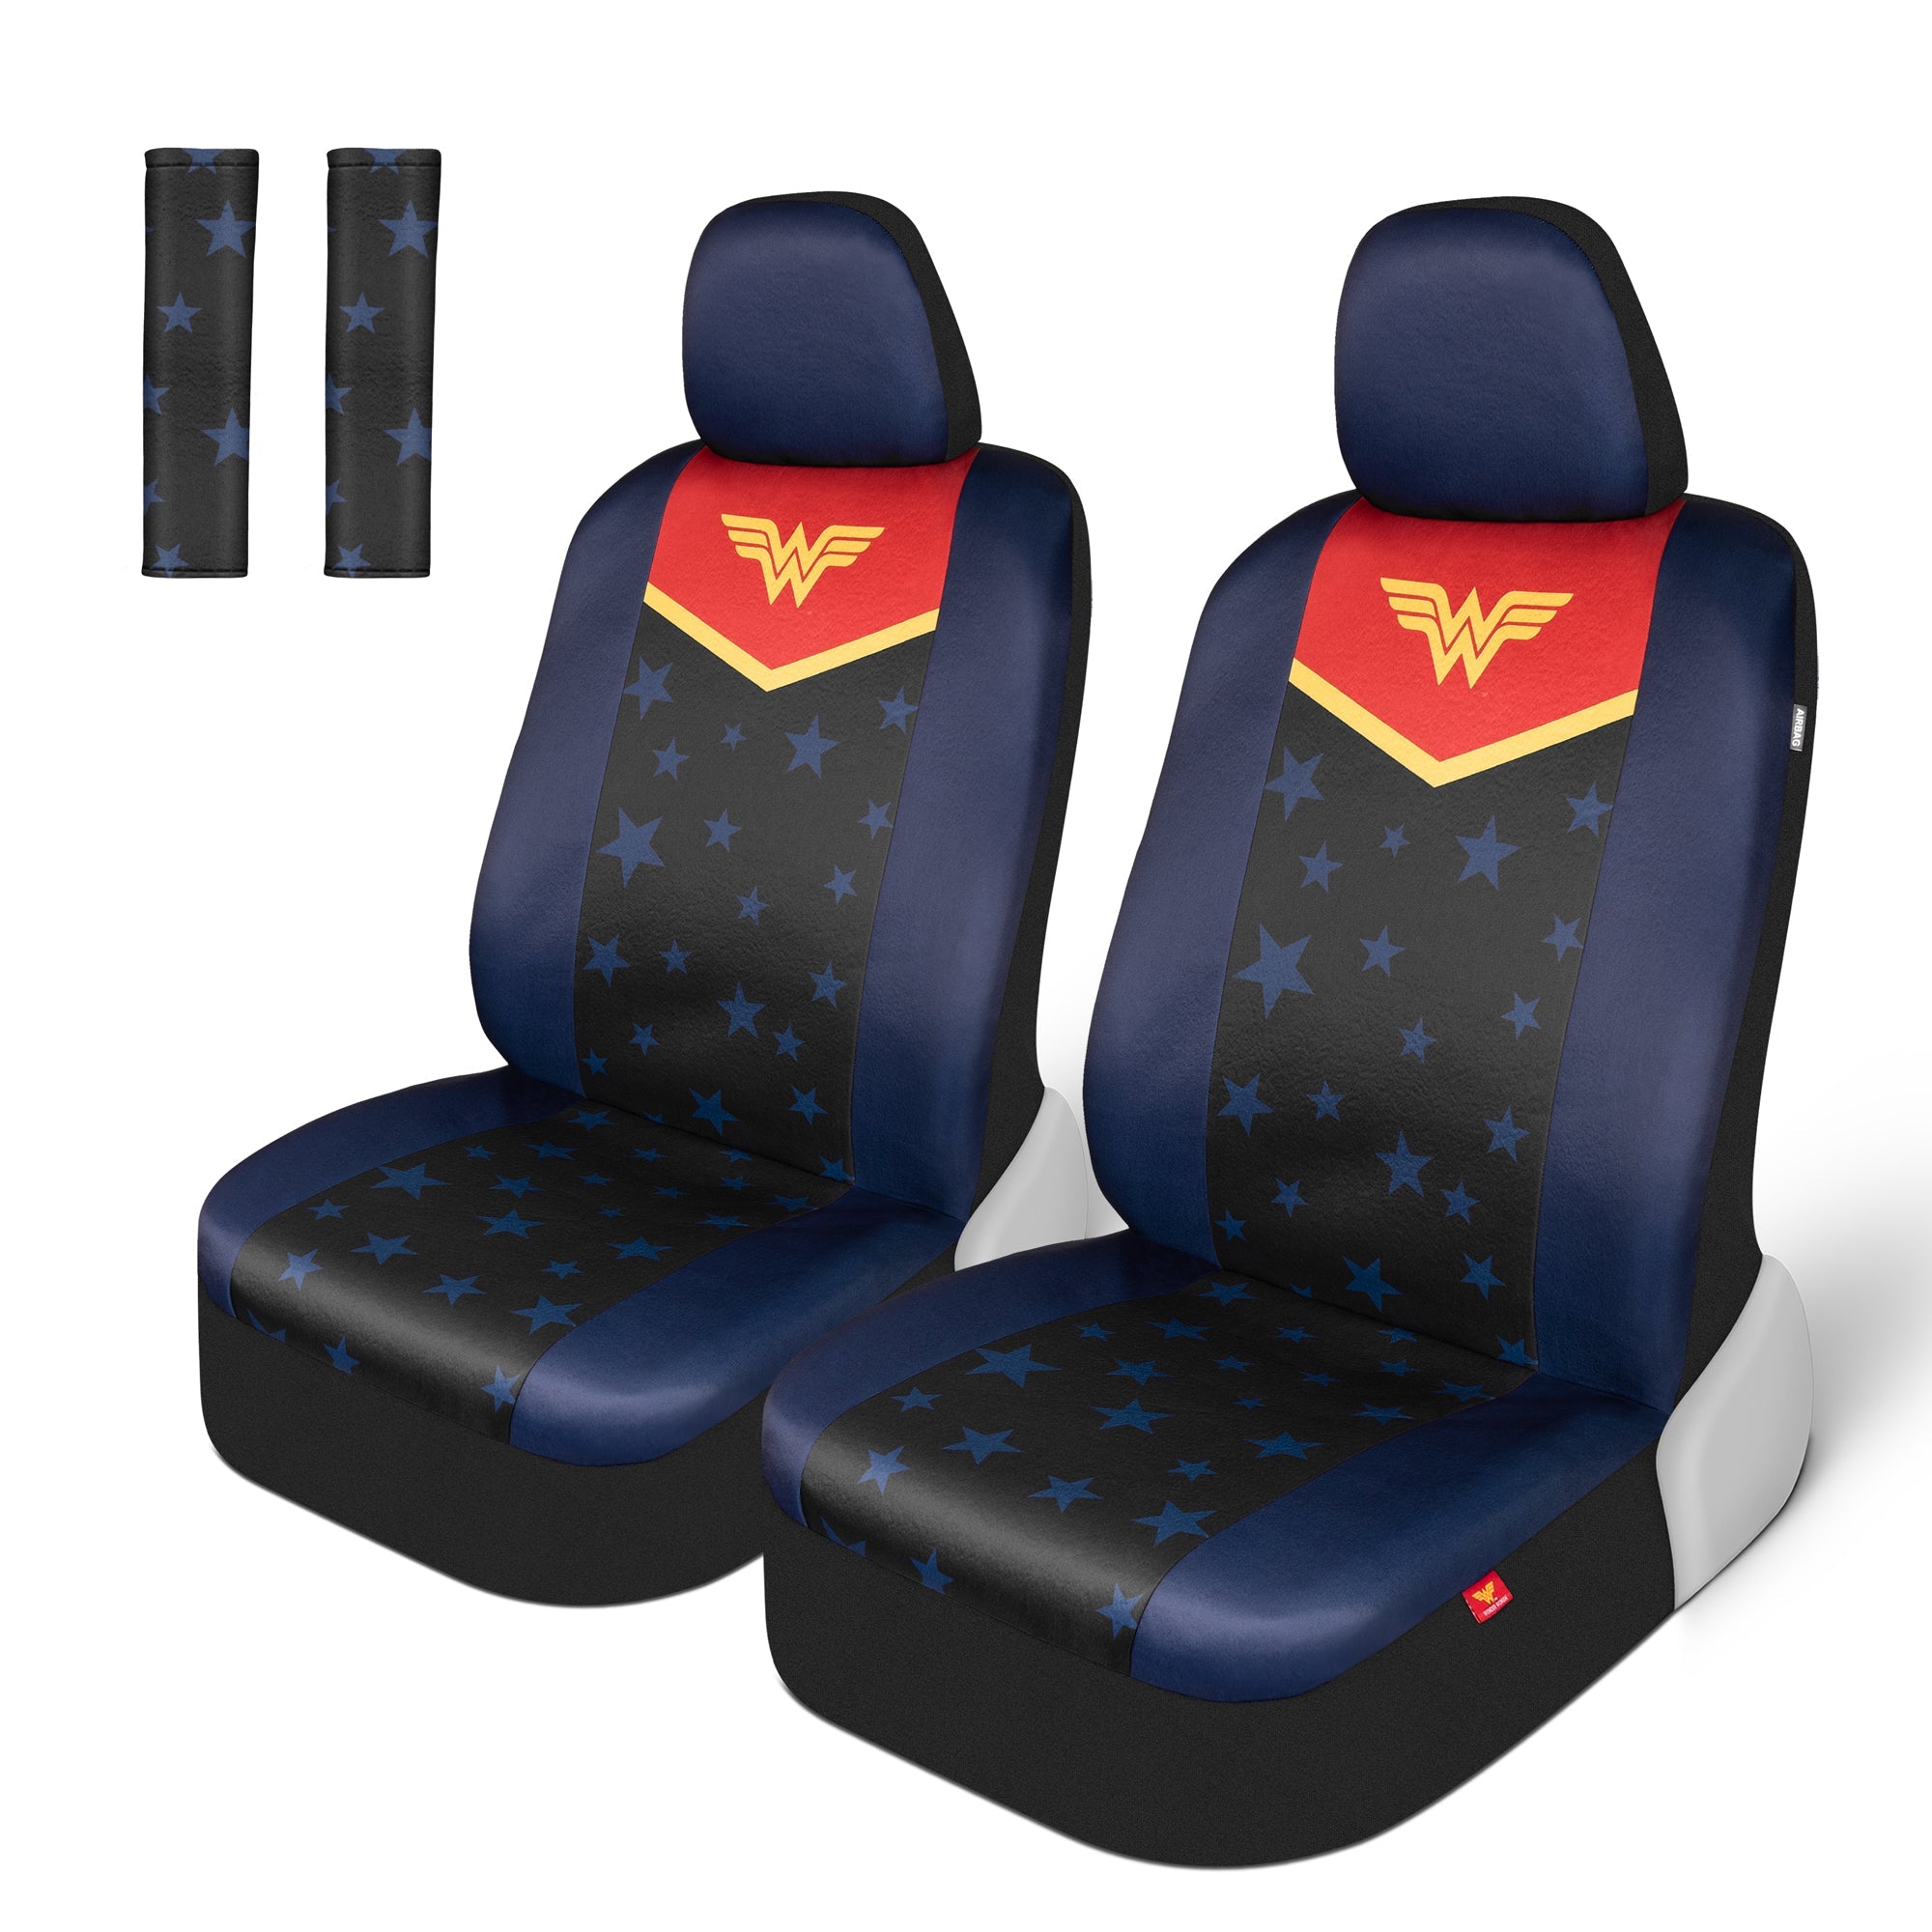 Wonder Woman Car Seat Covers - 100% Waterproof Front Pair Blue Stars on Black with Red/Yellow Logo - Side Airbag Safe Protection for Car SUV Van Truck